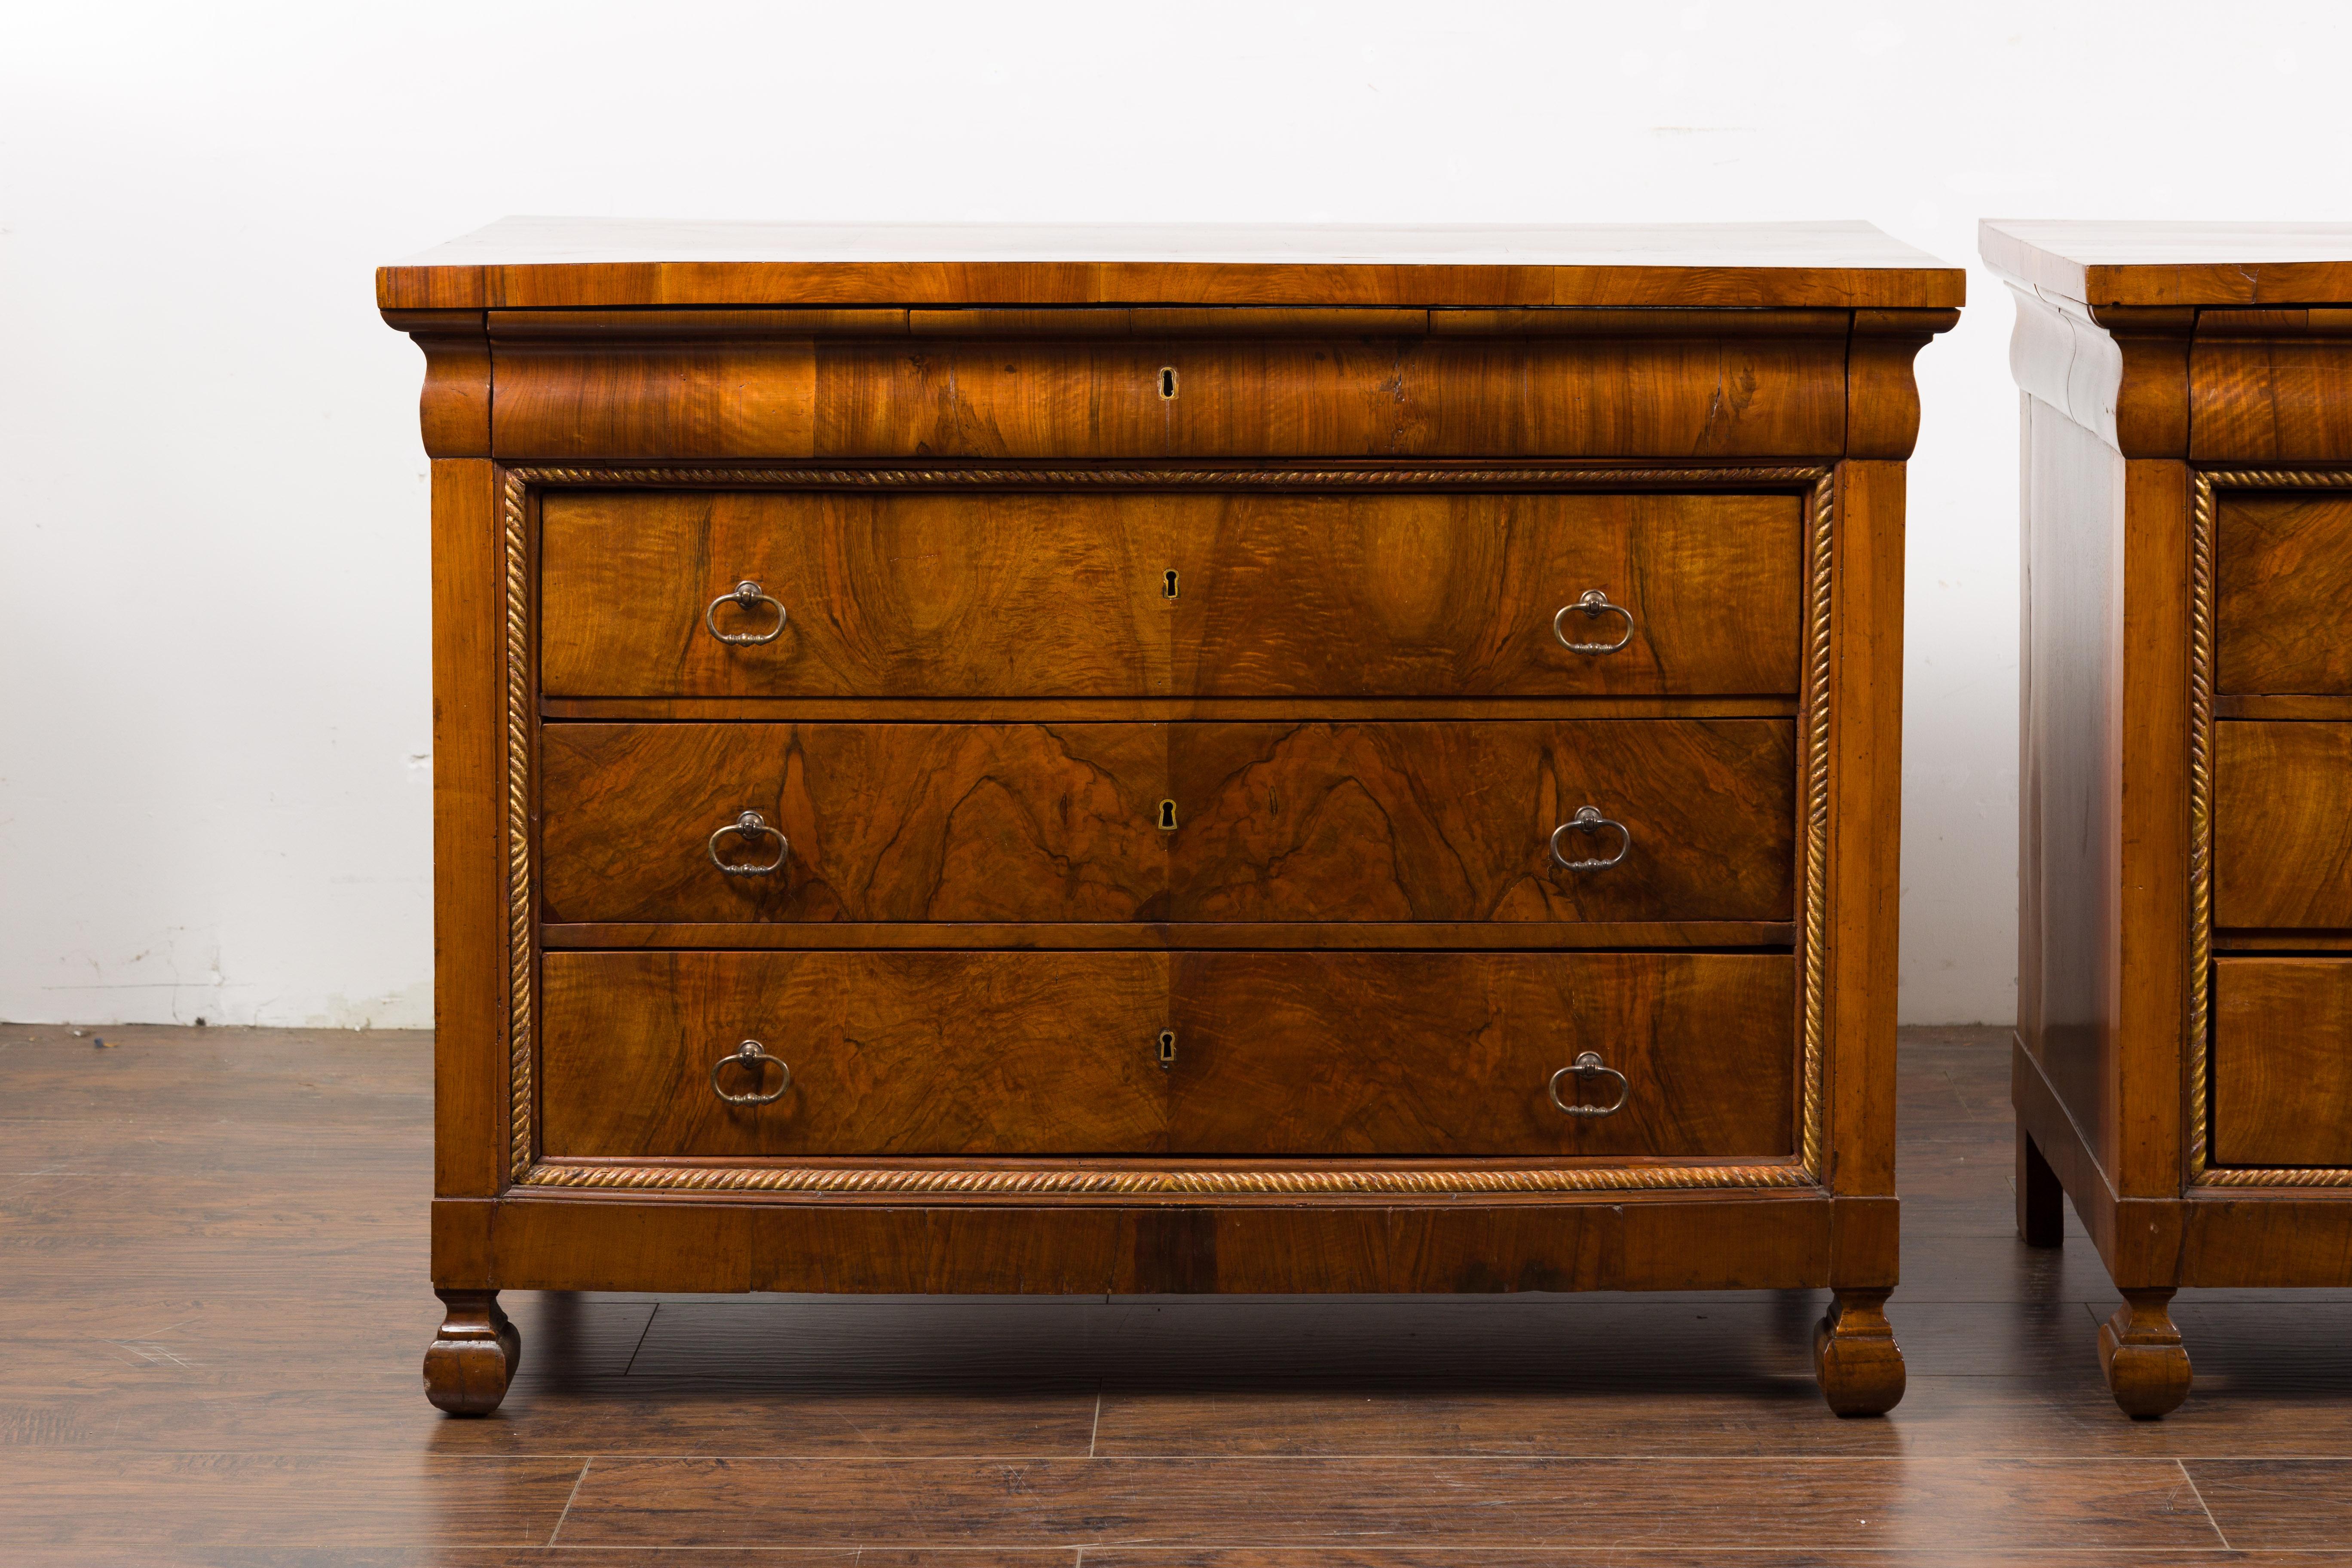 Pair of Italian 18th Century Walnut Four-Drawer Commodes with Bookmatched Veneer In Good Condition For Sale In Atlanta, GA